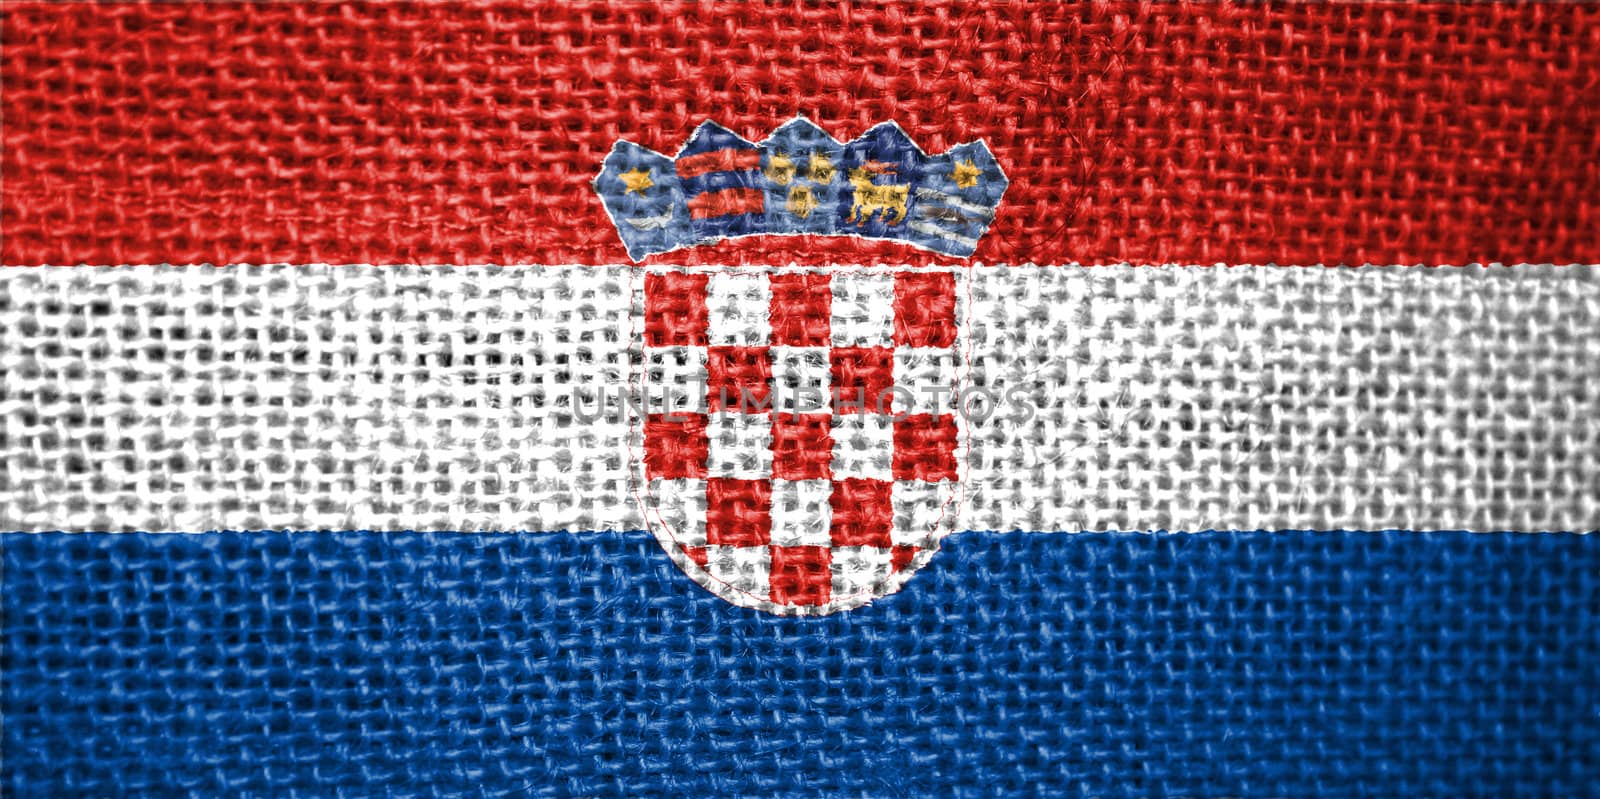 very big size illustration country flag of croatia